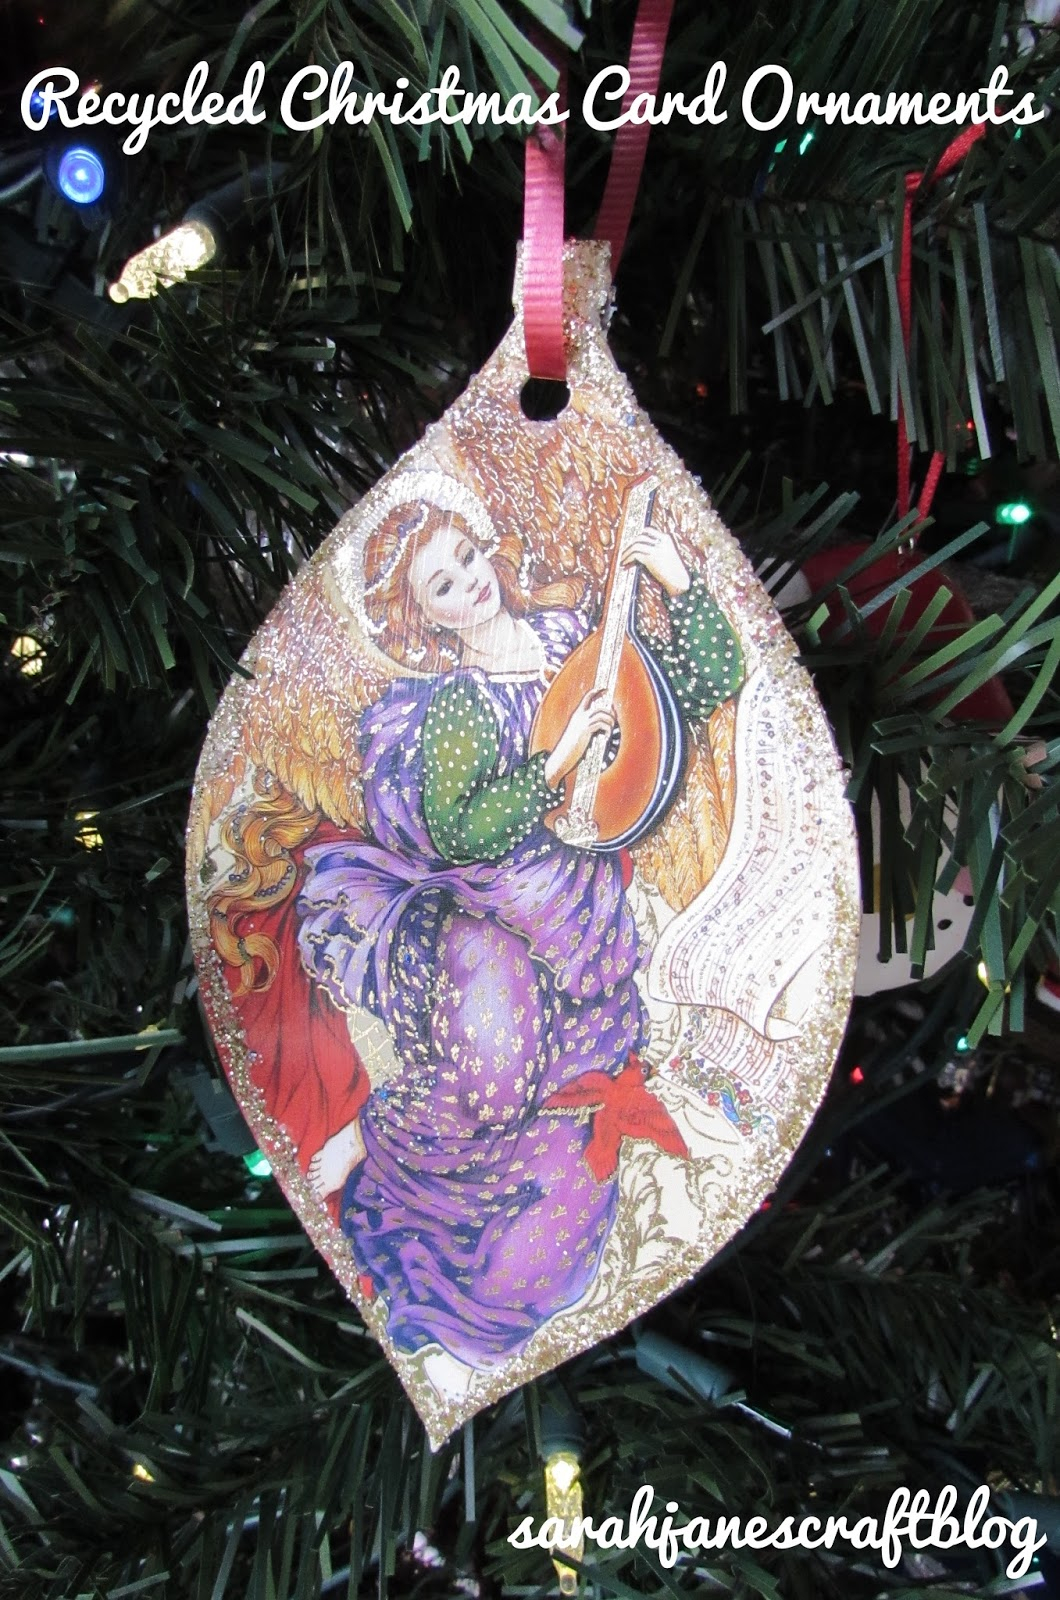 Sarah Jane s Craft Blog Recycled Christmas Card Ornaments Part 2